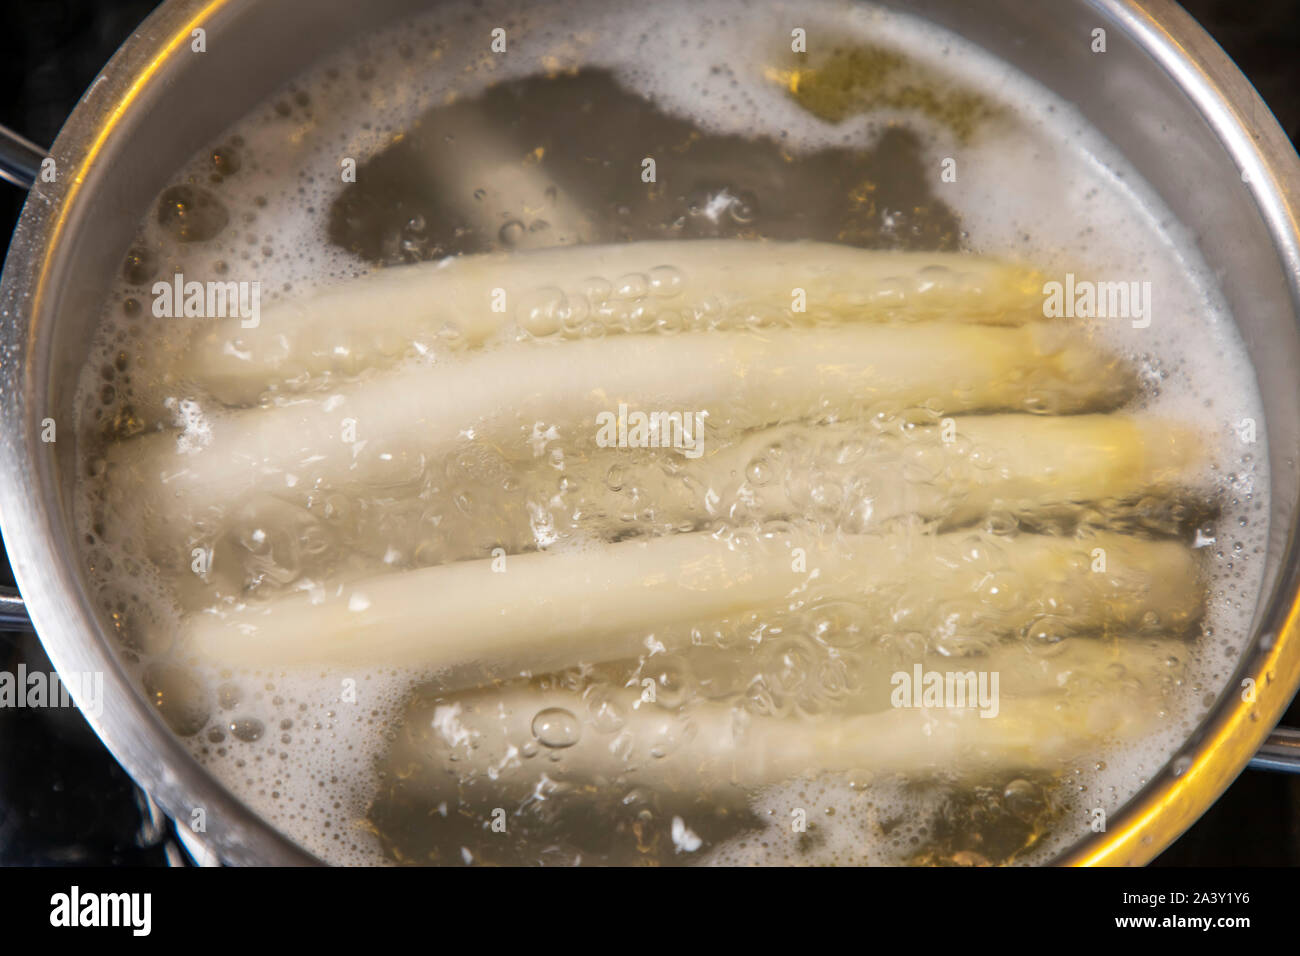 White asparagus, asparagus spears, cooked, Stock Photo